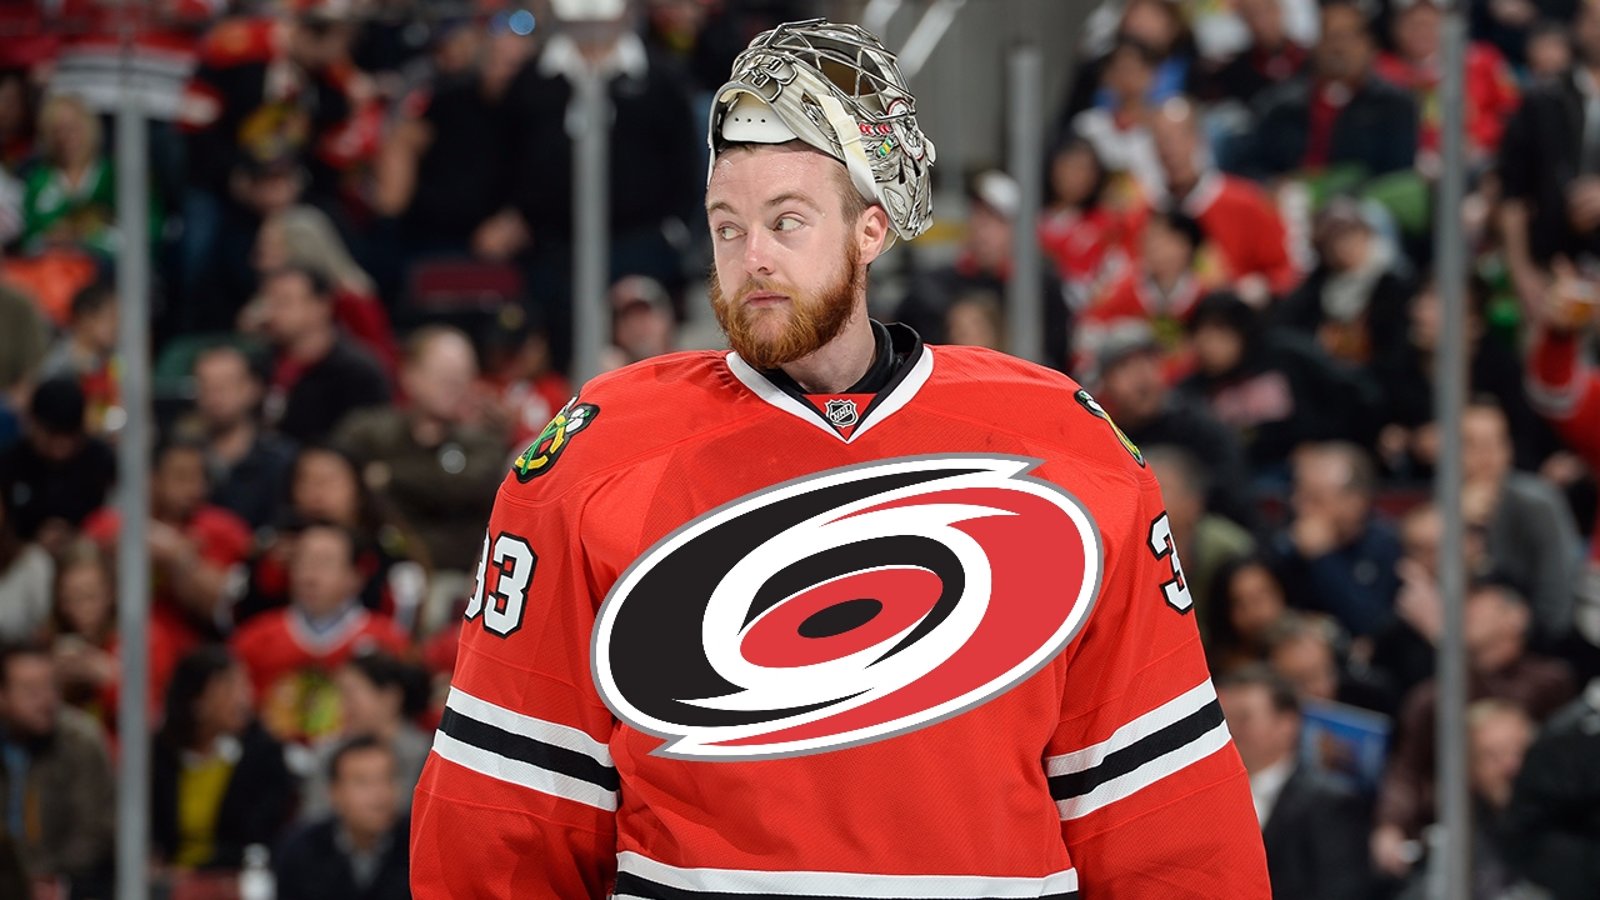 Breaking: NHL goalie market heating up as another lands on waivers